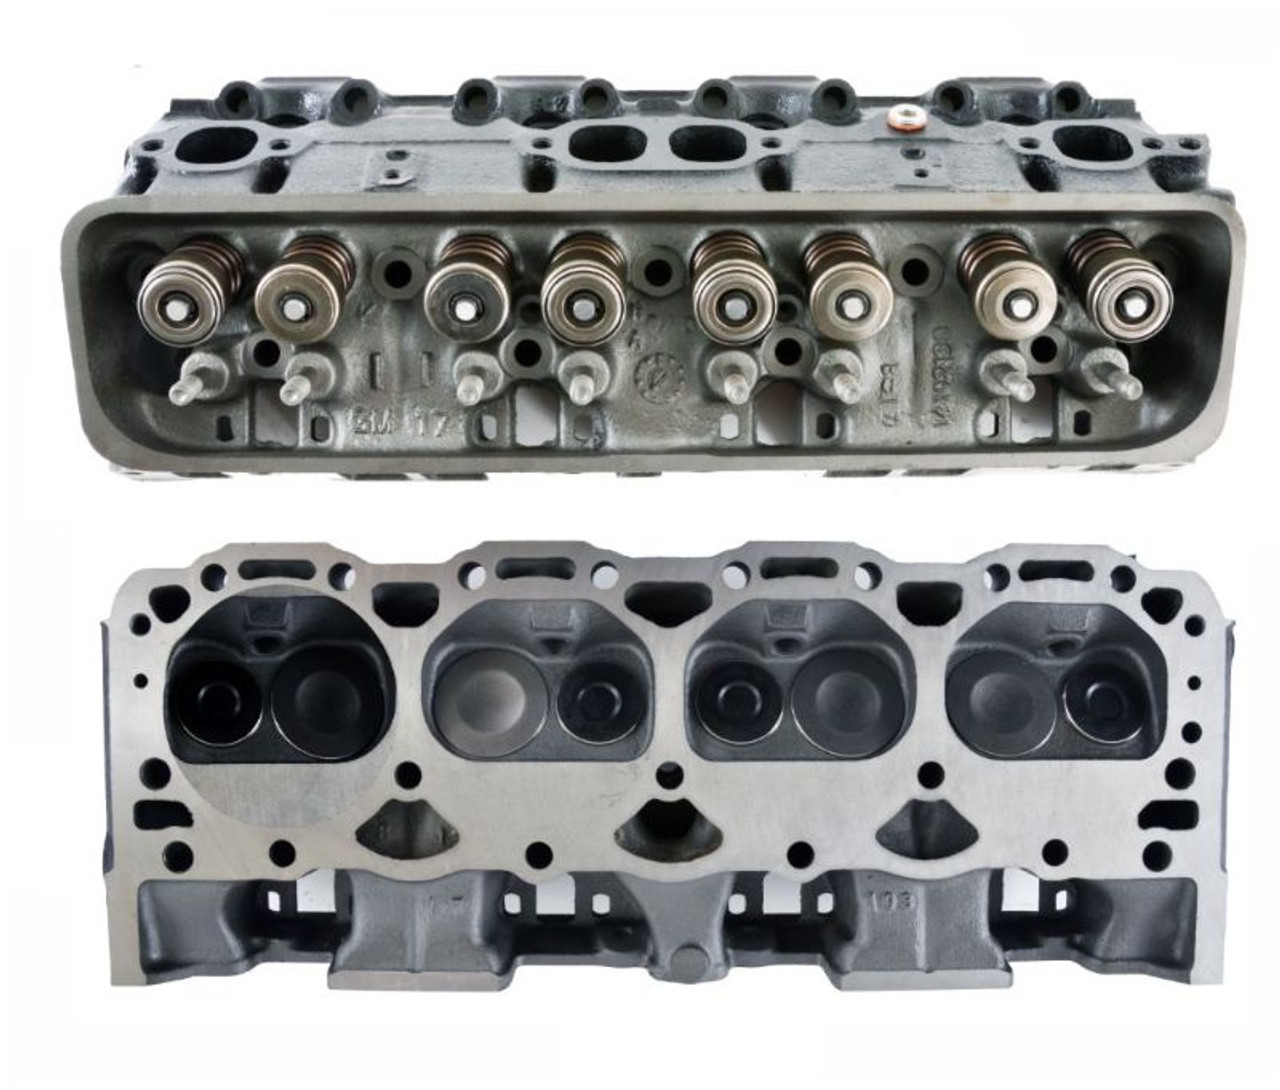 Cylinder Head Assembly - 1996 Chevrolet Express 2500 5.7L (CH1064R.K292)